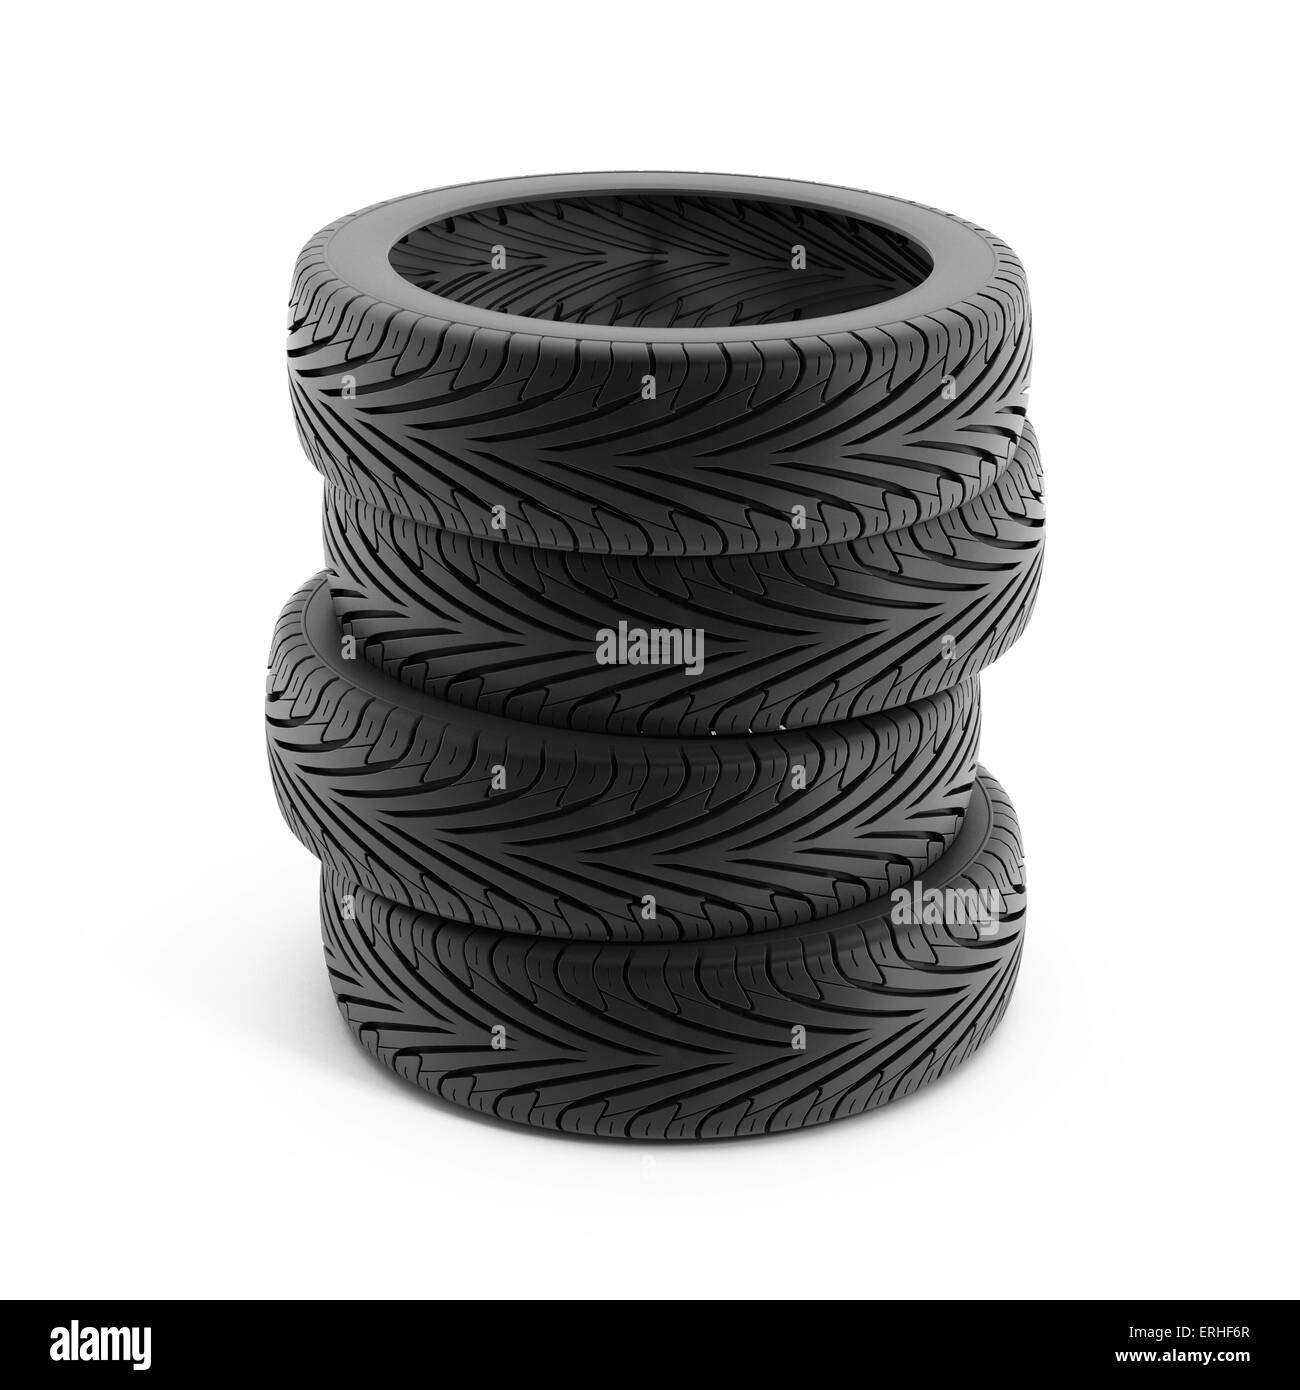 Tire stack isolated on white background. Stock Photo